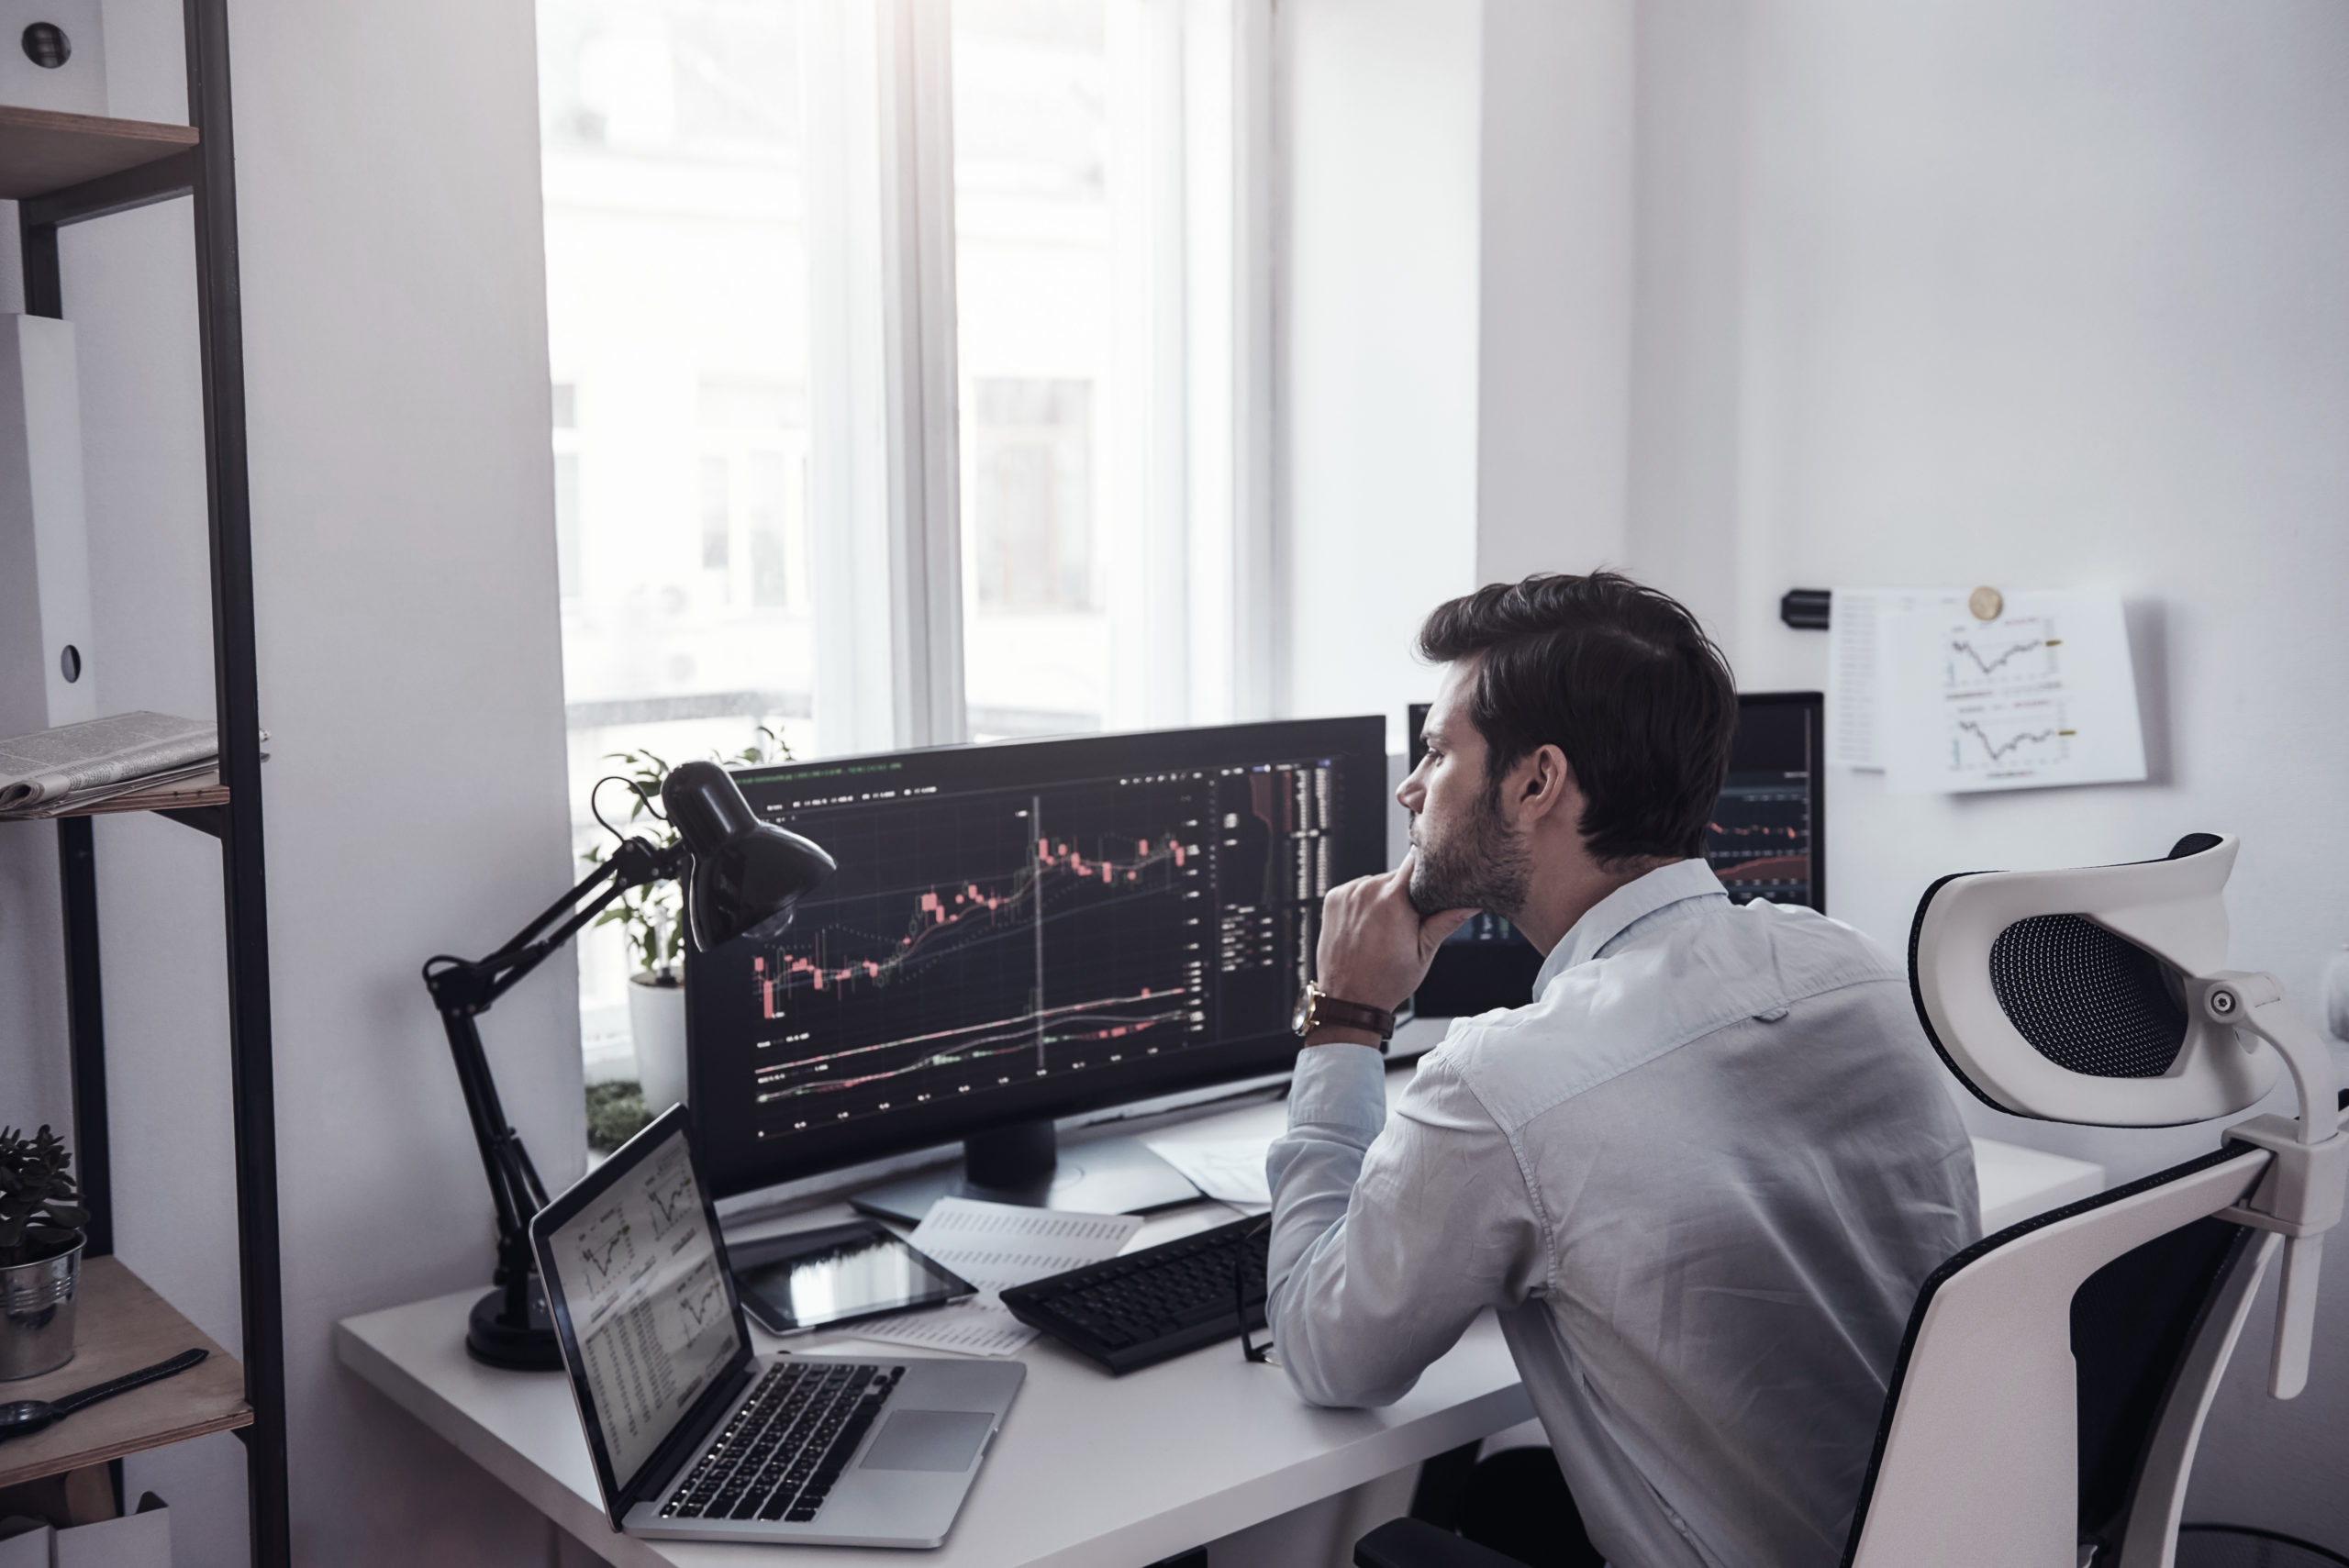 Trading on world markets. Young stock market broker analyzing data and graphs on multiple computer screens while sitting in modern office. Stock exchange. Trade concept. Investment concept